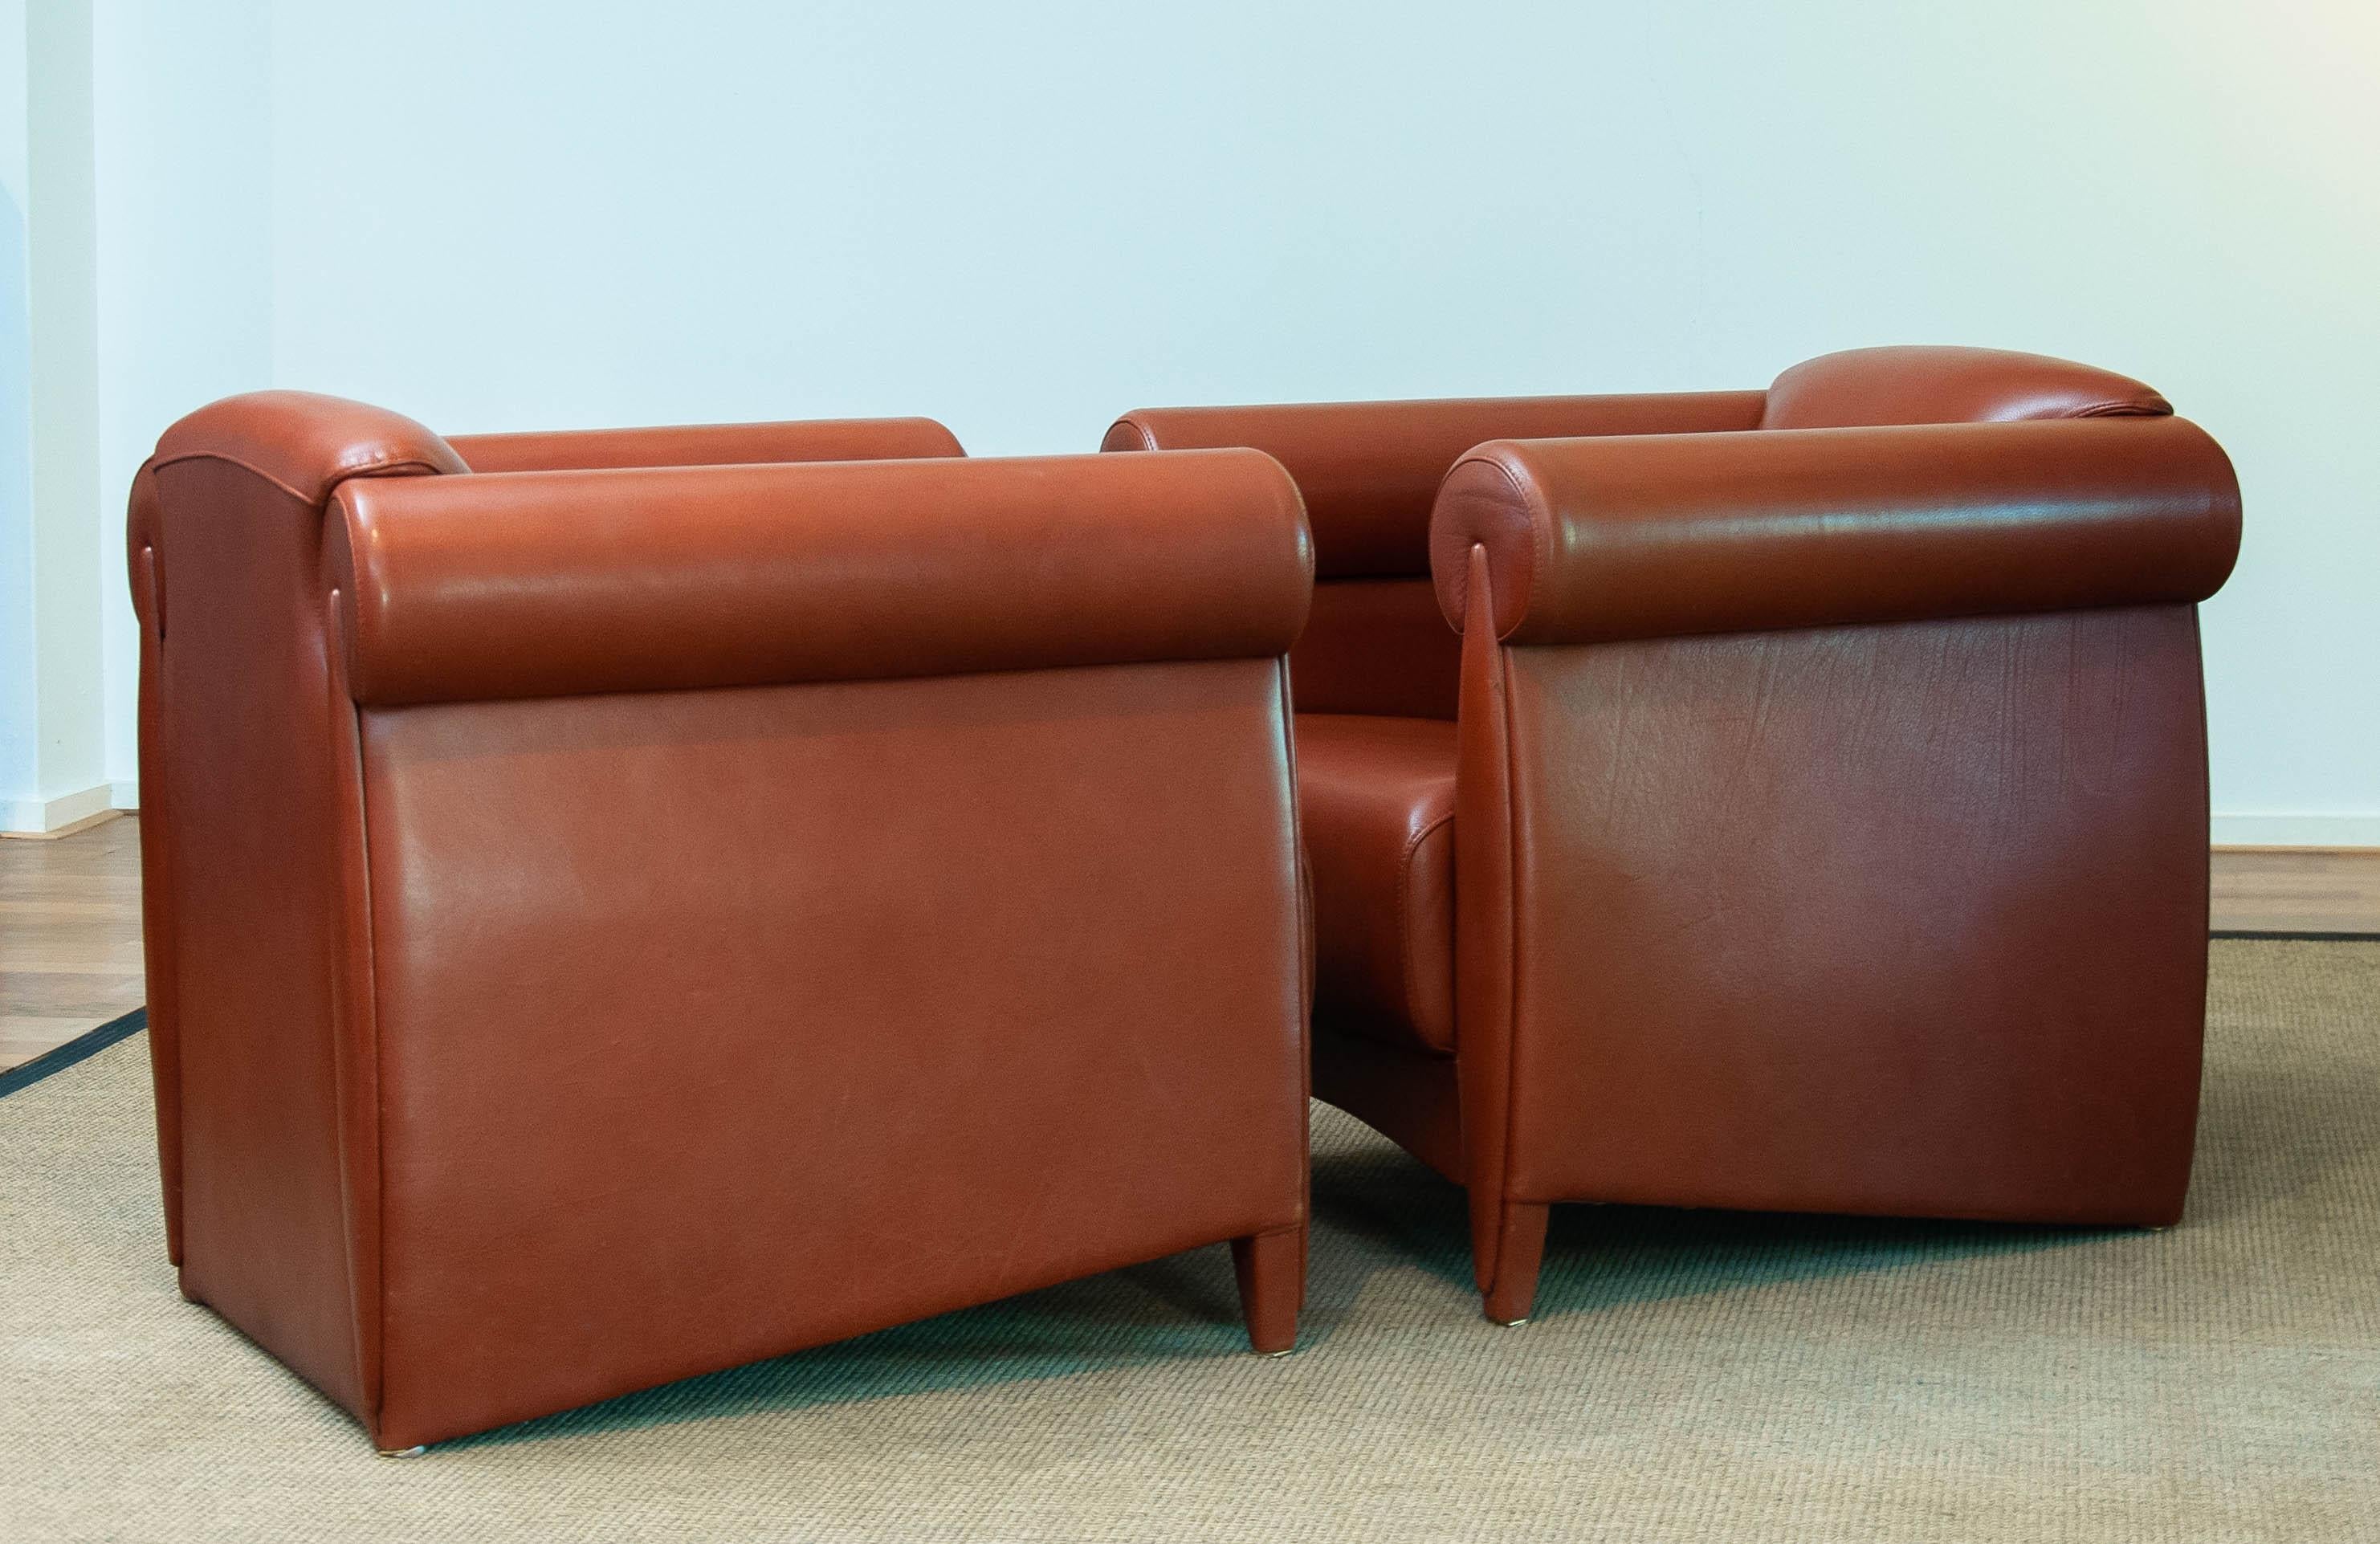 1980s Modern Pair Lounge / Club Chairs In Cognac Leather By Klaus Wettergren In Good Condition For Sale In Silvolde, Gelderland